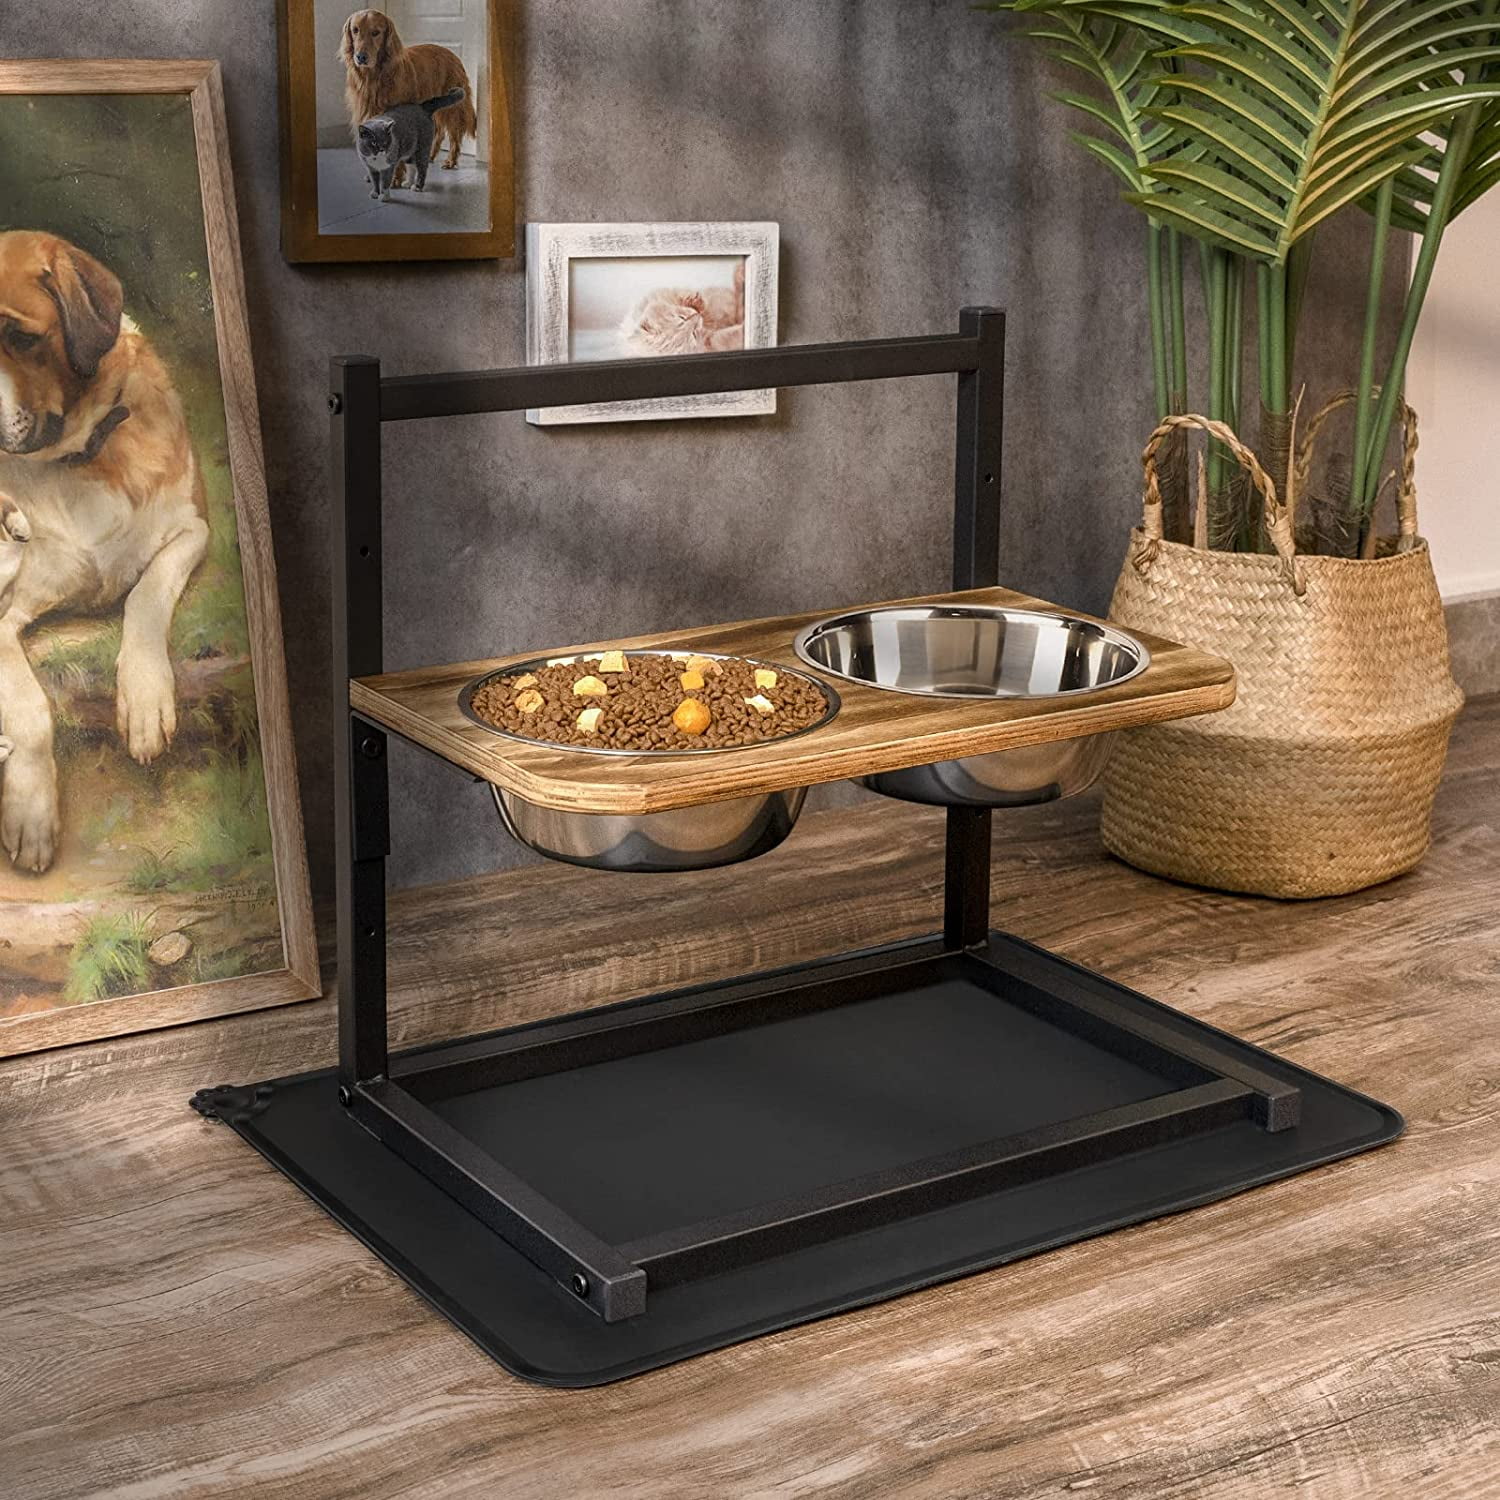 Siooko Elevated Dog Bowls for Large Dogs Wood Raised Dog Bowl Stand with 2  St